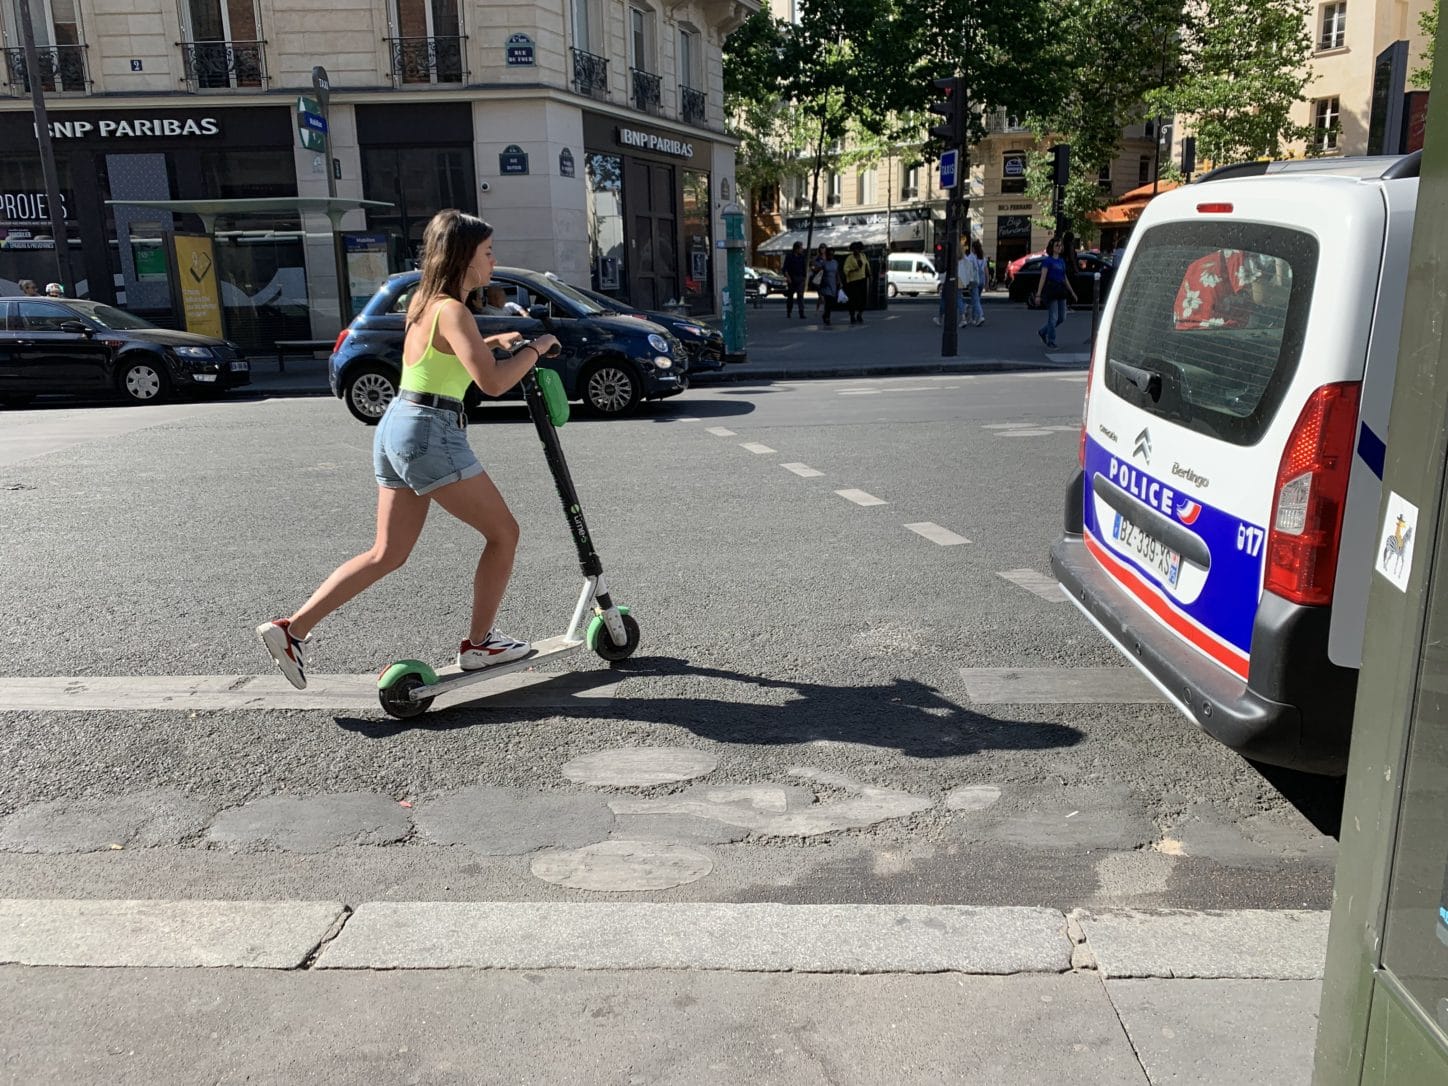 Electric scooter riding in Paris. Photo by ConsumerMojo.com